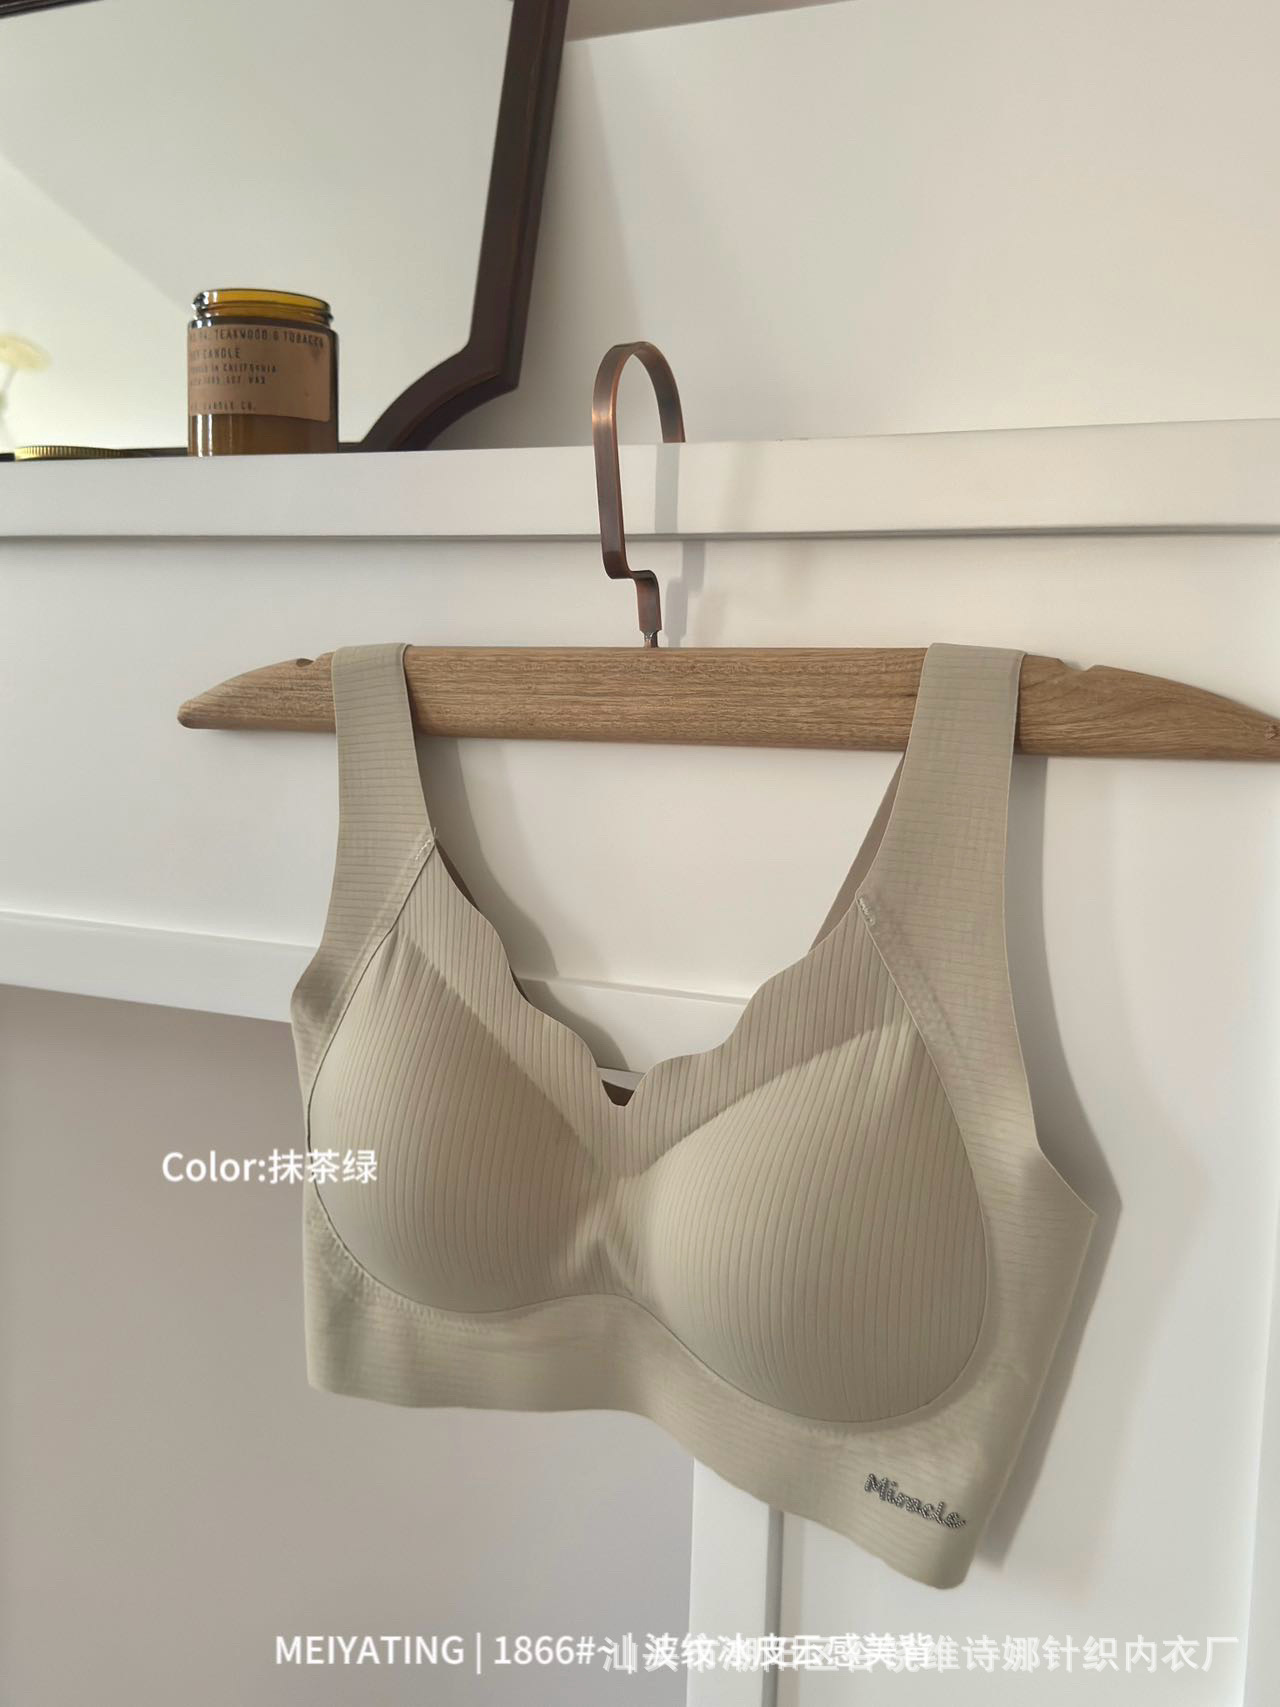 Spring New Product #1866 Corrugated Cold Cover Cloud Feeling Wrapped Chest Beauty Back Bra Fixed Cotton Cup Wide Shoulder Vest for Women Seamless